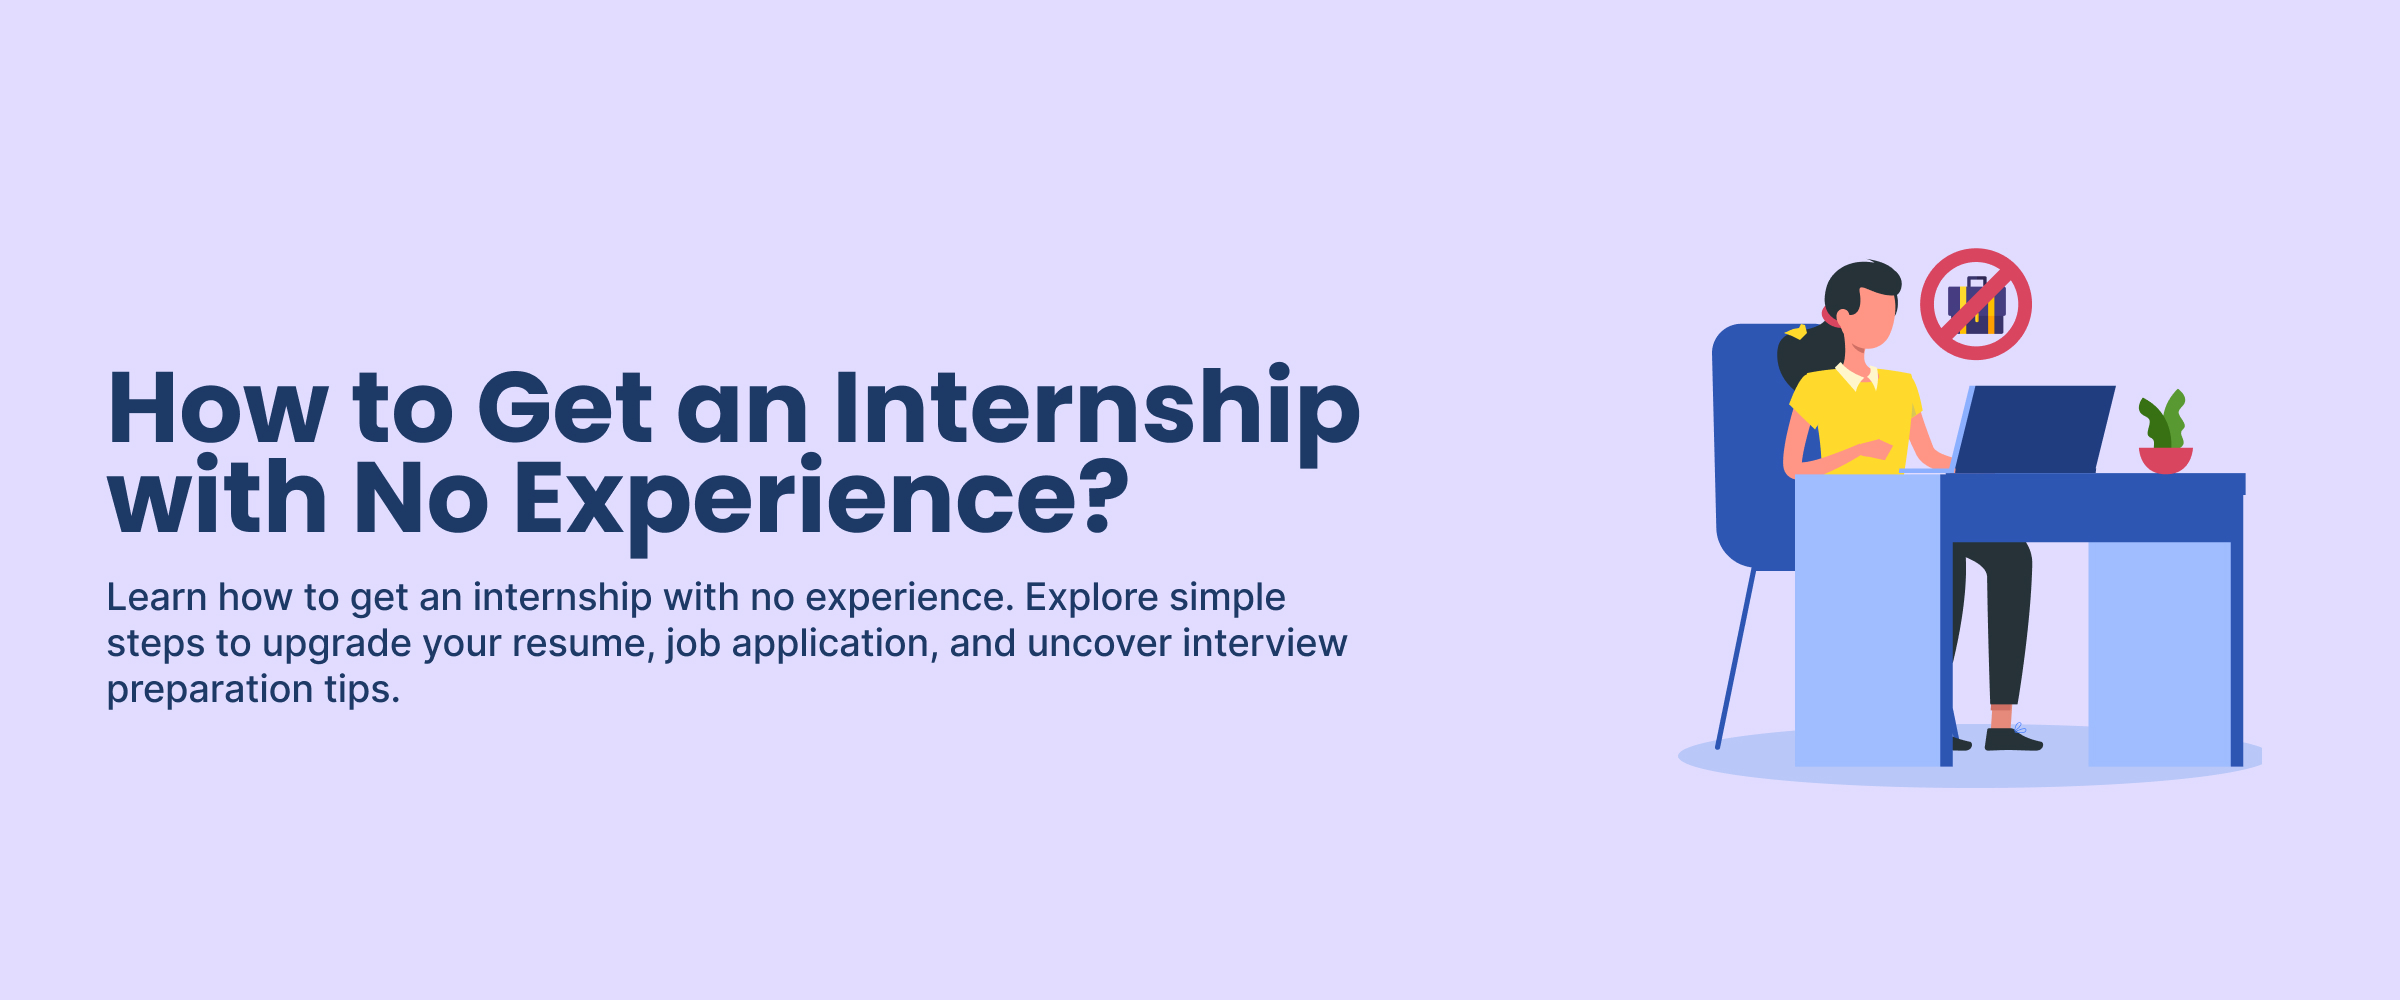 How To Get An Internship With No Experience